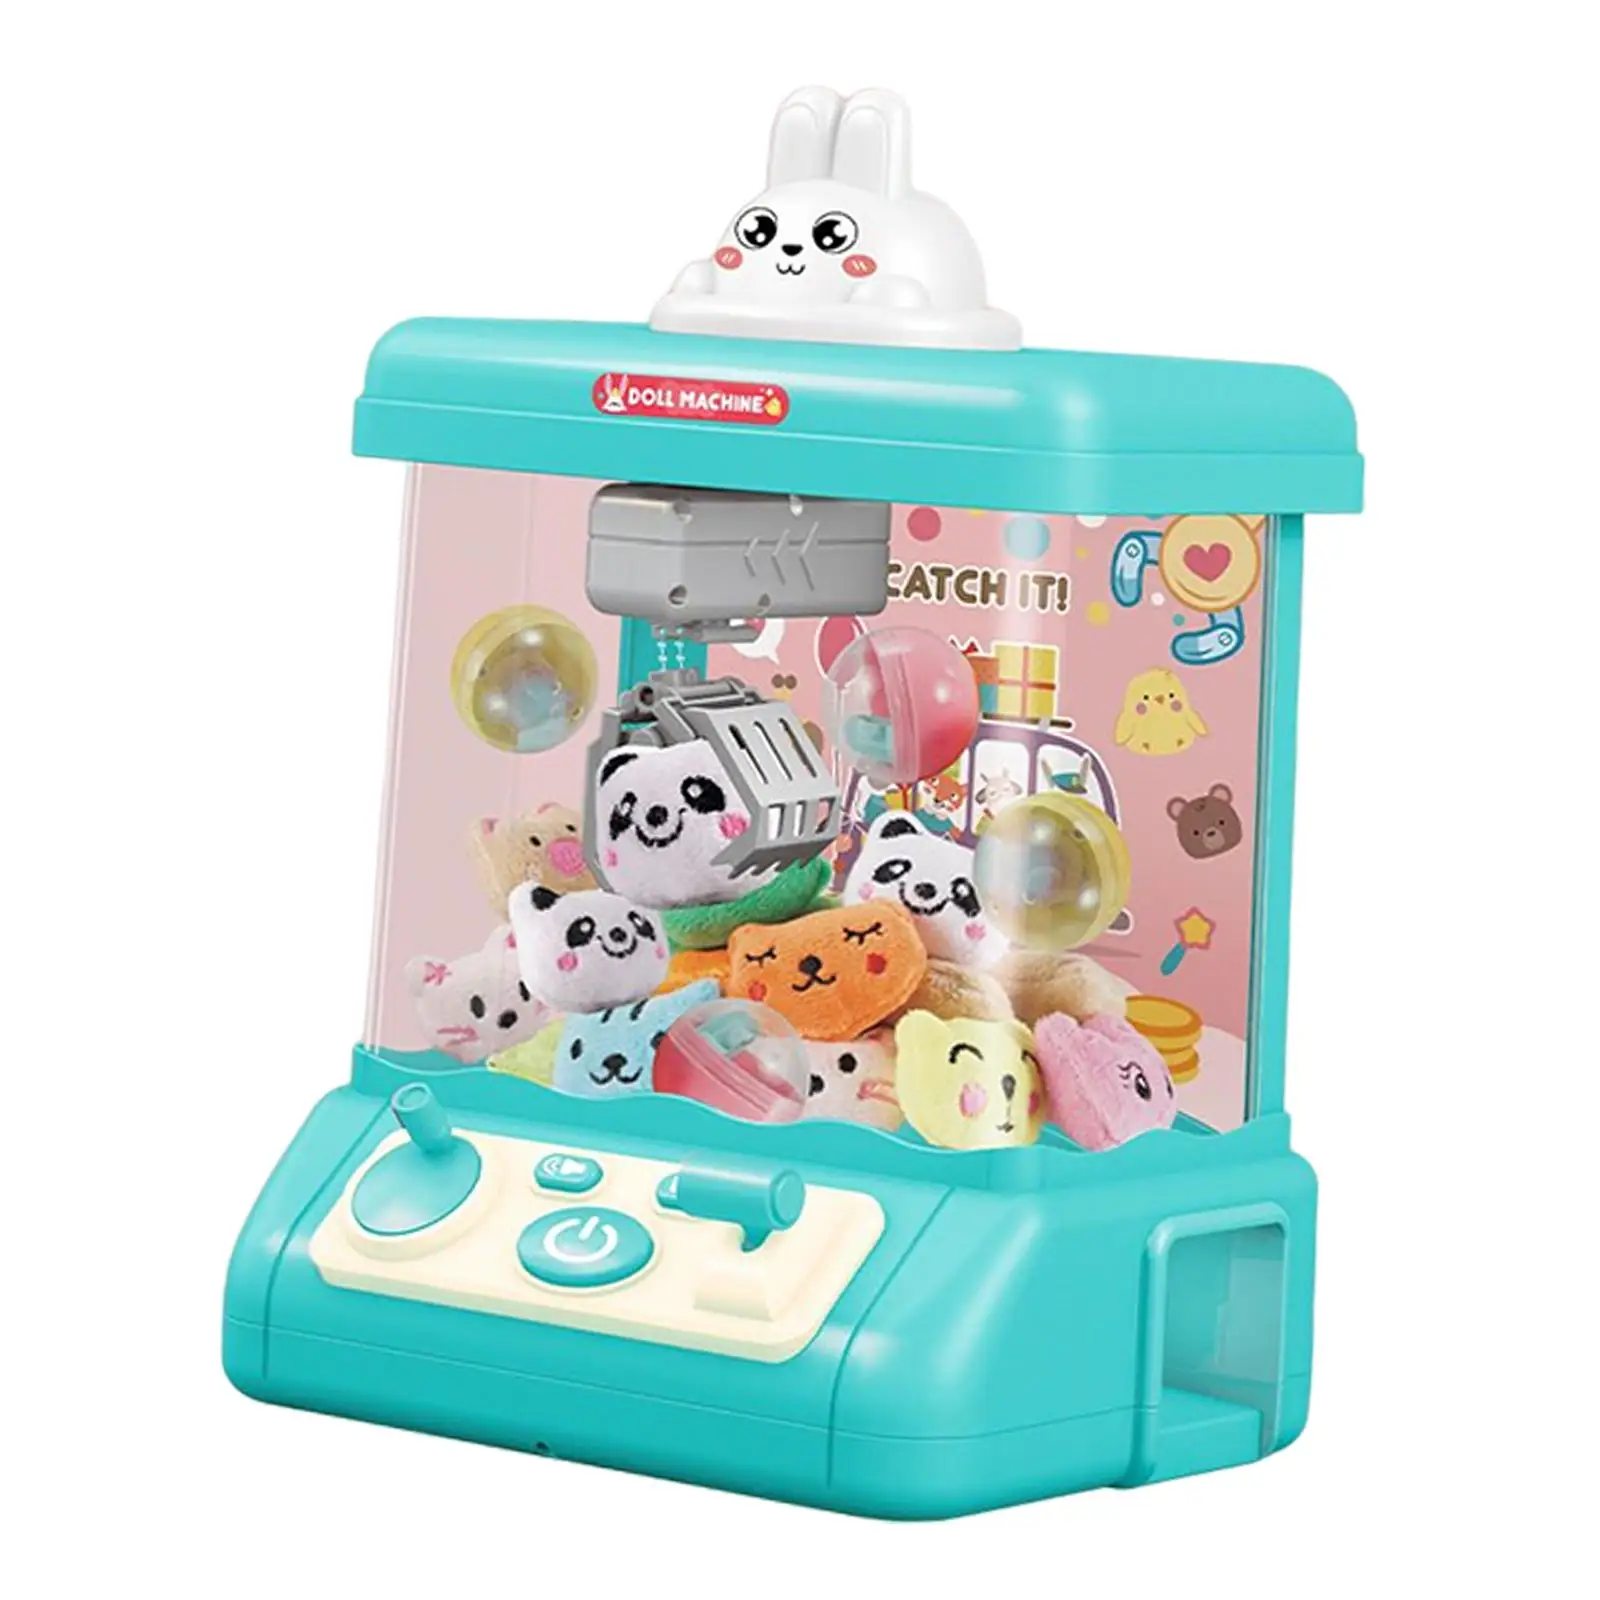 Household Claw Machine with Music and Lighting Arcade Game Gifts DIY Catching Doll Machine Grabber Machine Claw Toy for Children